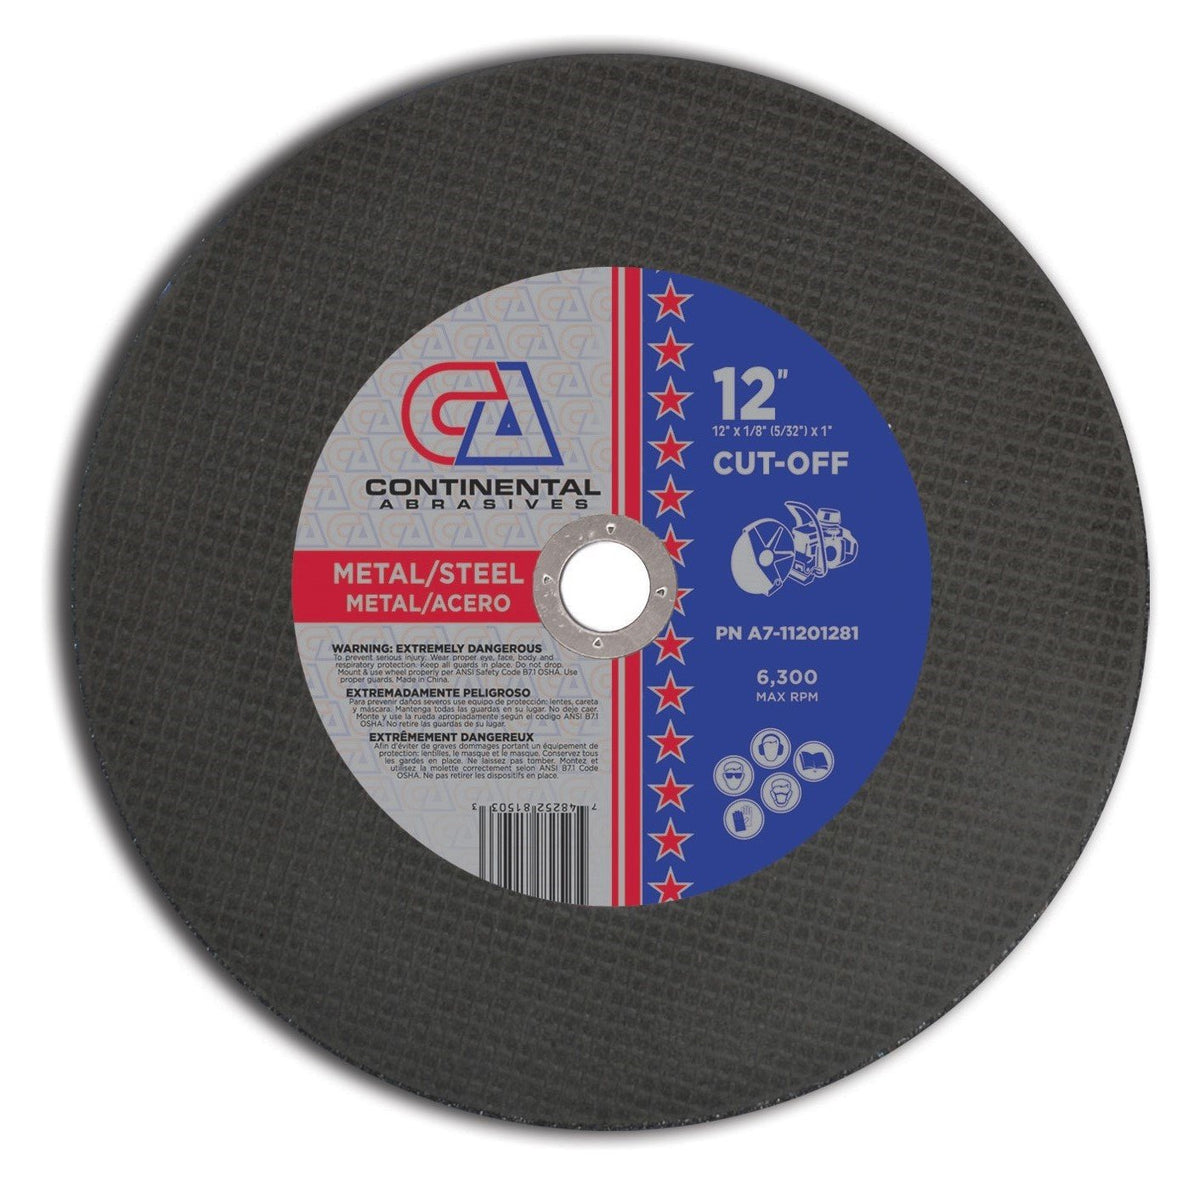 12" x 1/8" (5/32") x 1" Type 1 Gas Saw Wheels for Metal/Steel (Pack of 10)